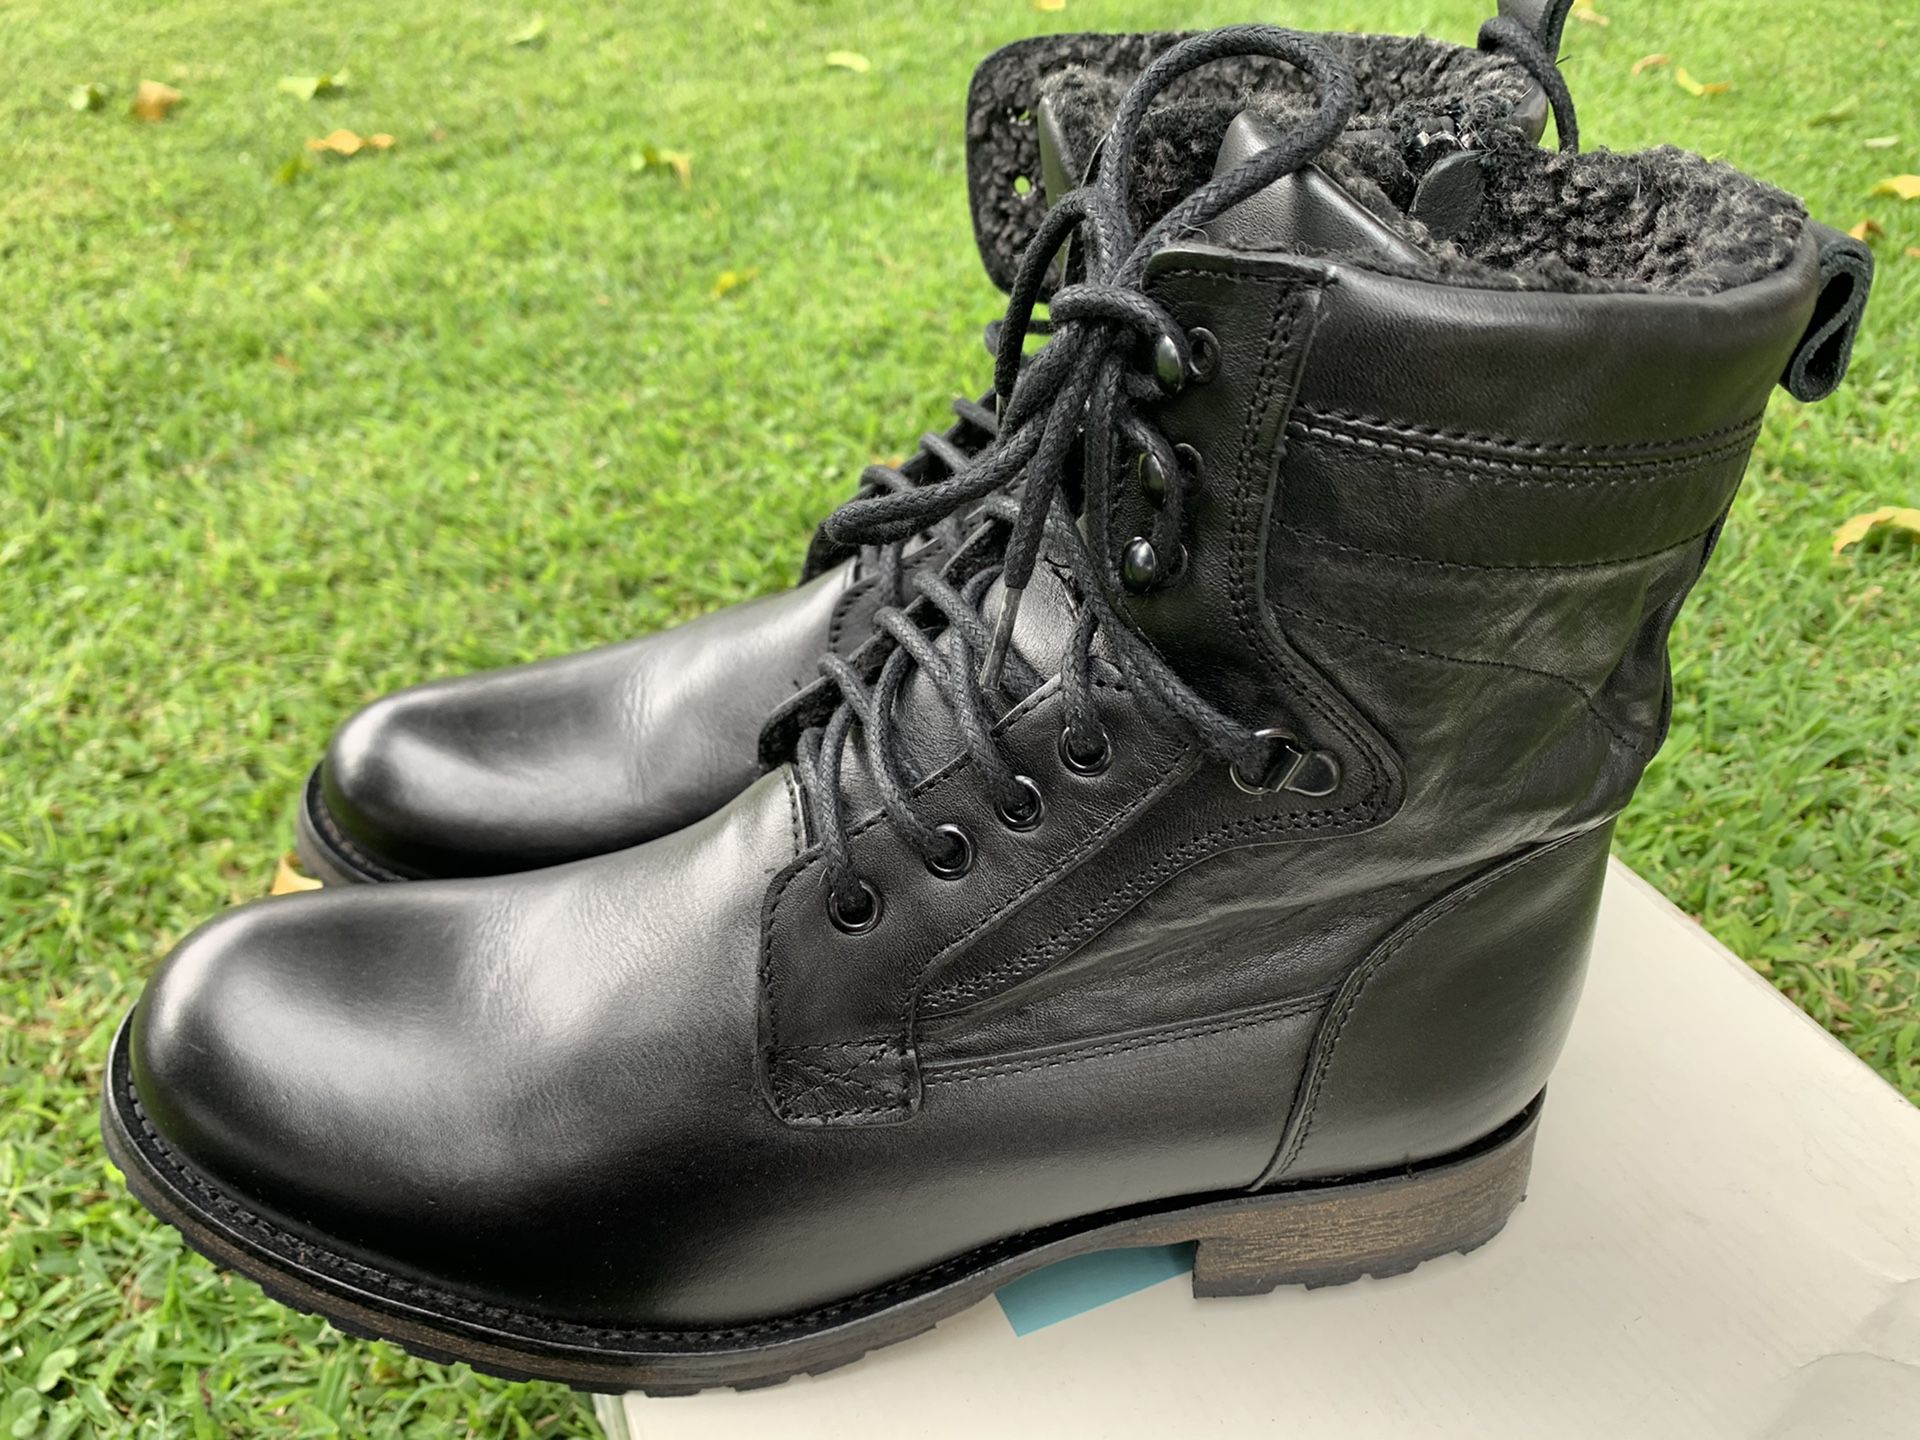 Men call it spring made my Aldo boots size 10